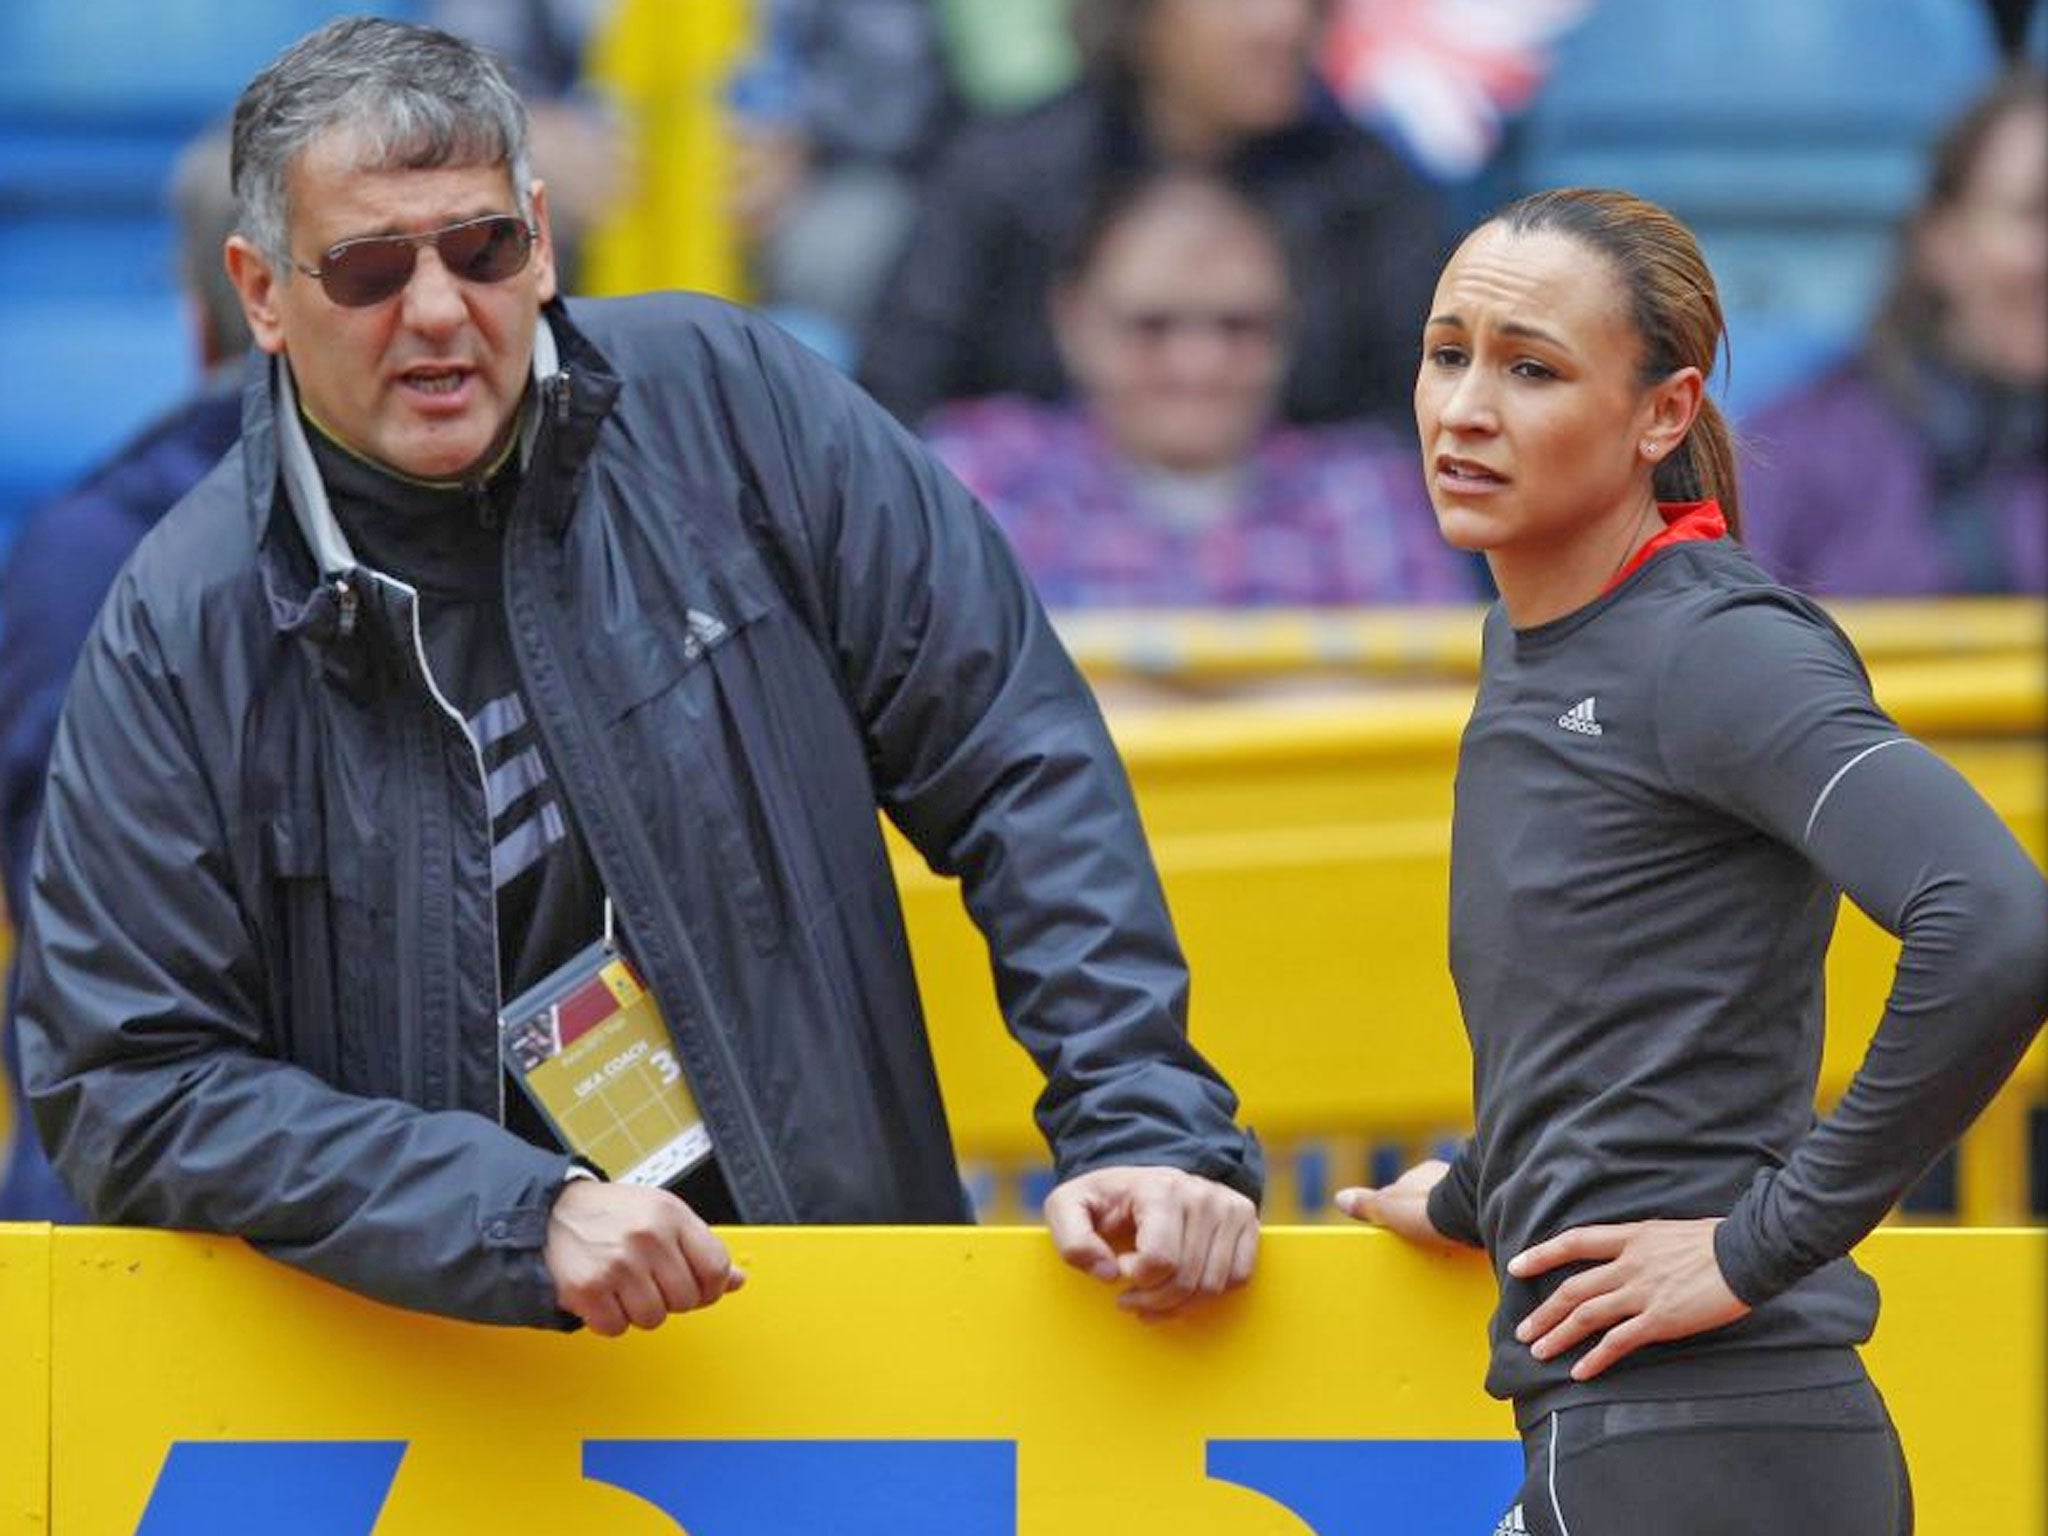 Olympic gold medallist Jessica Ennis has been coached by Minichiello since the age of 12